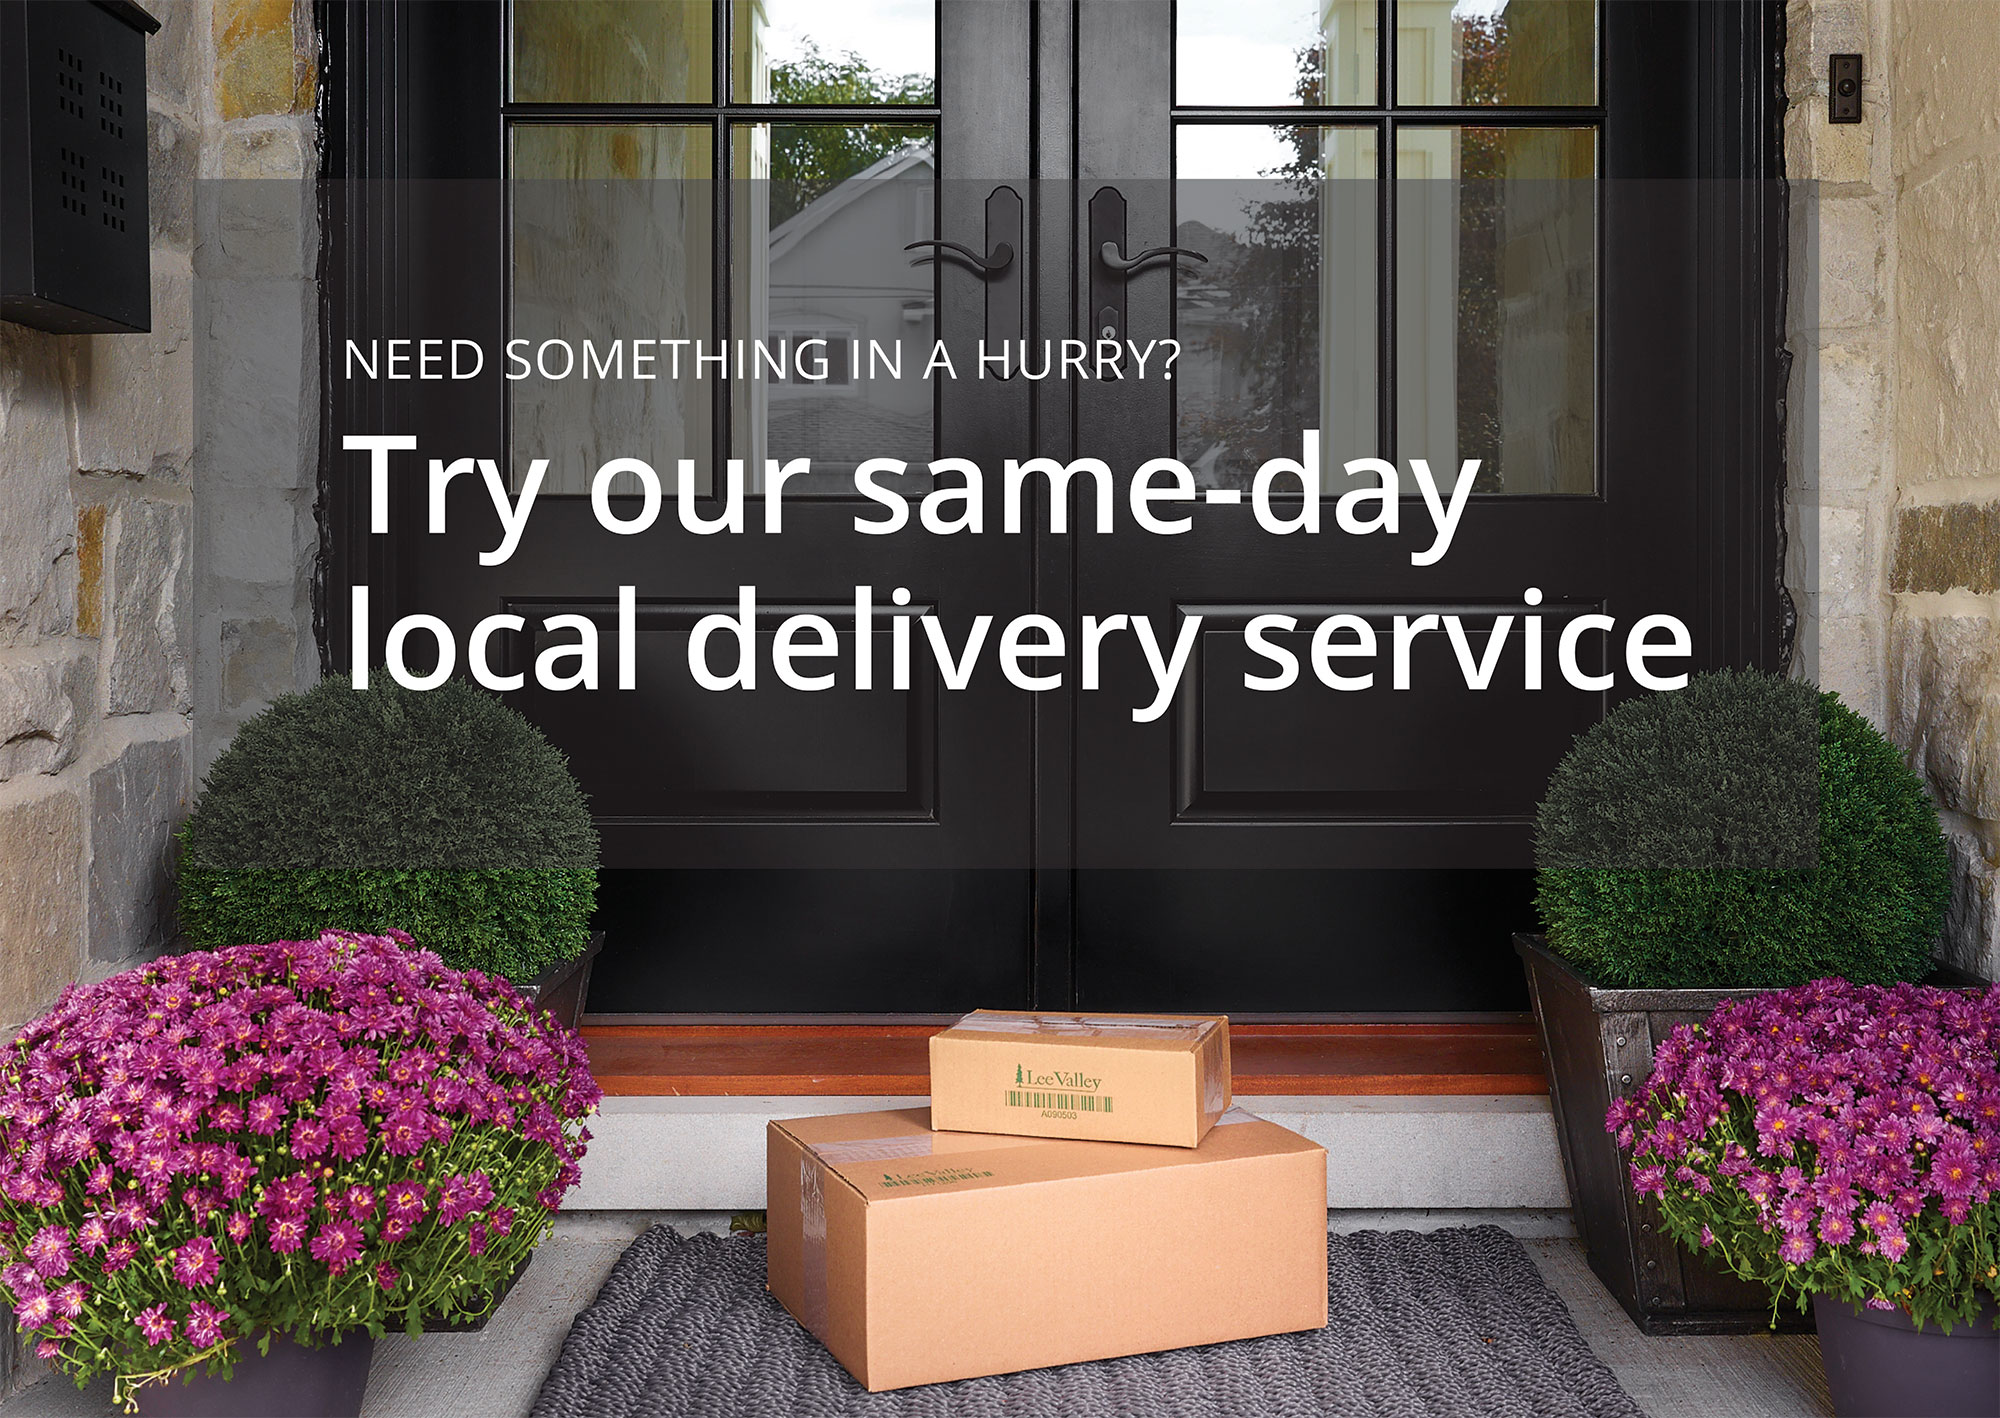 Need something in a hurry? Try our same-day local delivery service.